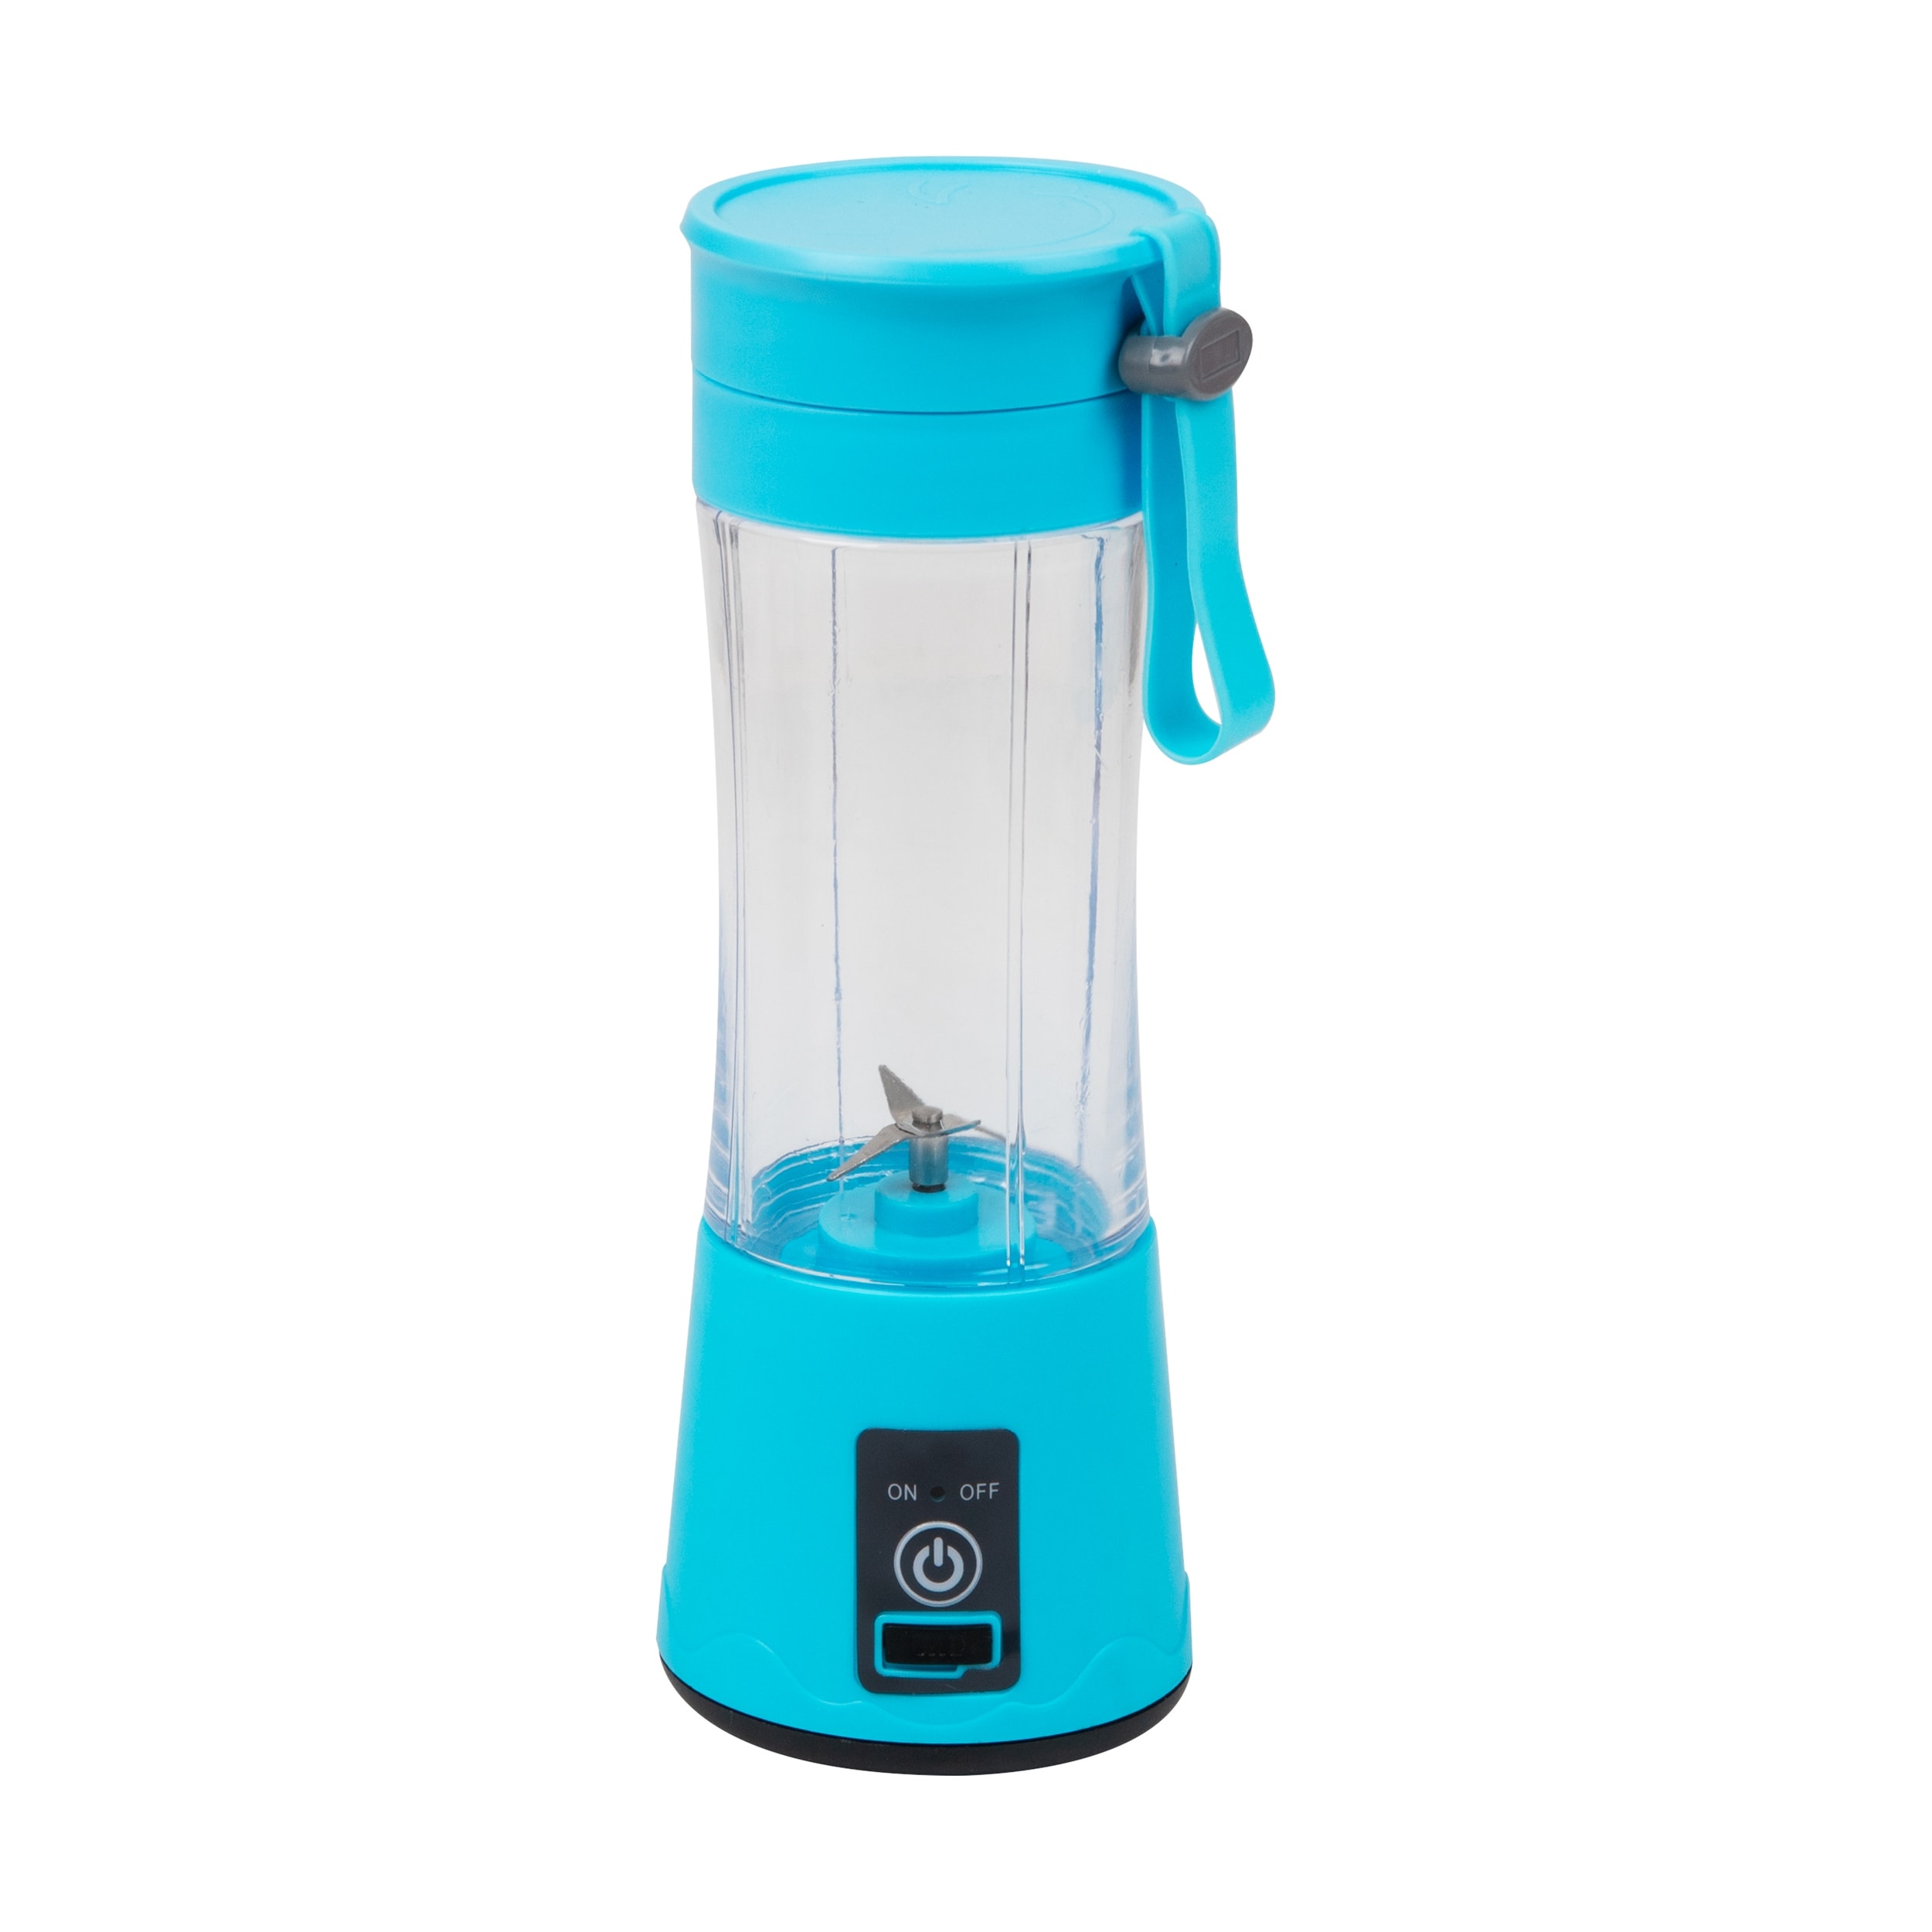 https://ak1.ostkcdn.com/images/products/is/images/direct/26bde40fa98e710e3702cb3e8205f3caaebc7966/Mind-Reader-Handheld%2C-Rechargeable-Personal-Juicer%2C-USB-Powered%2C-Portable-Blender.jpg